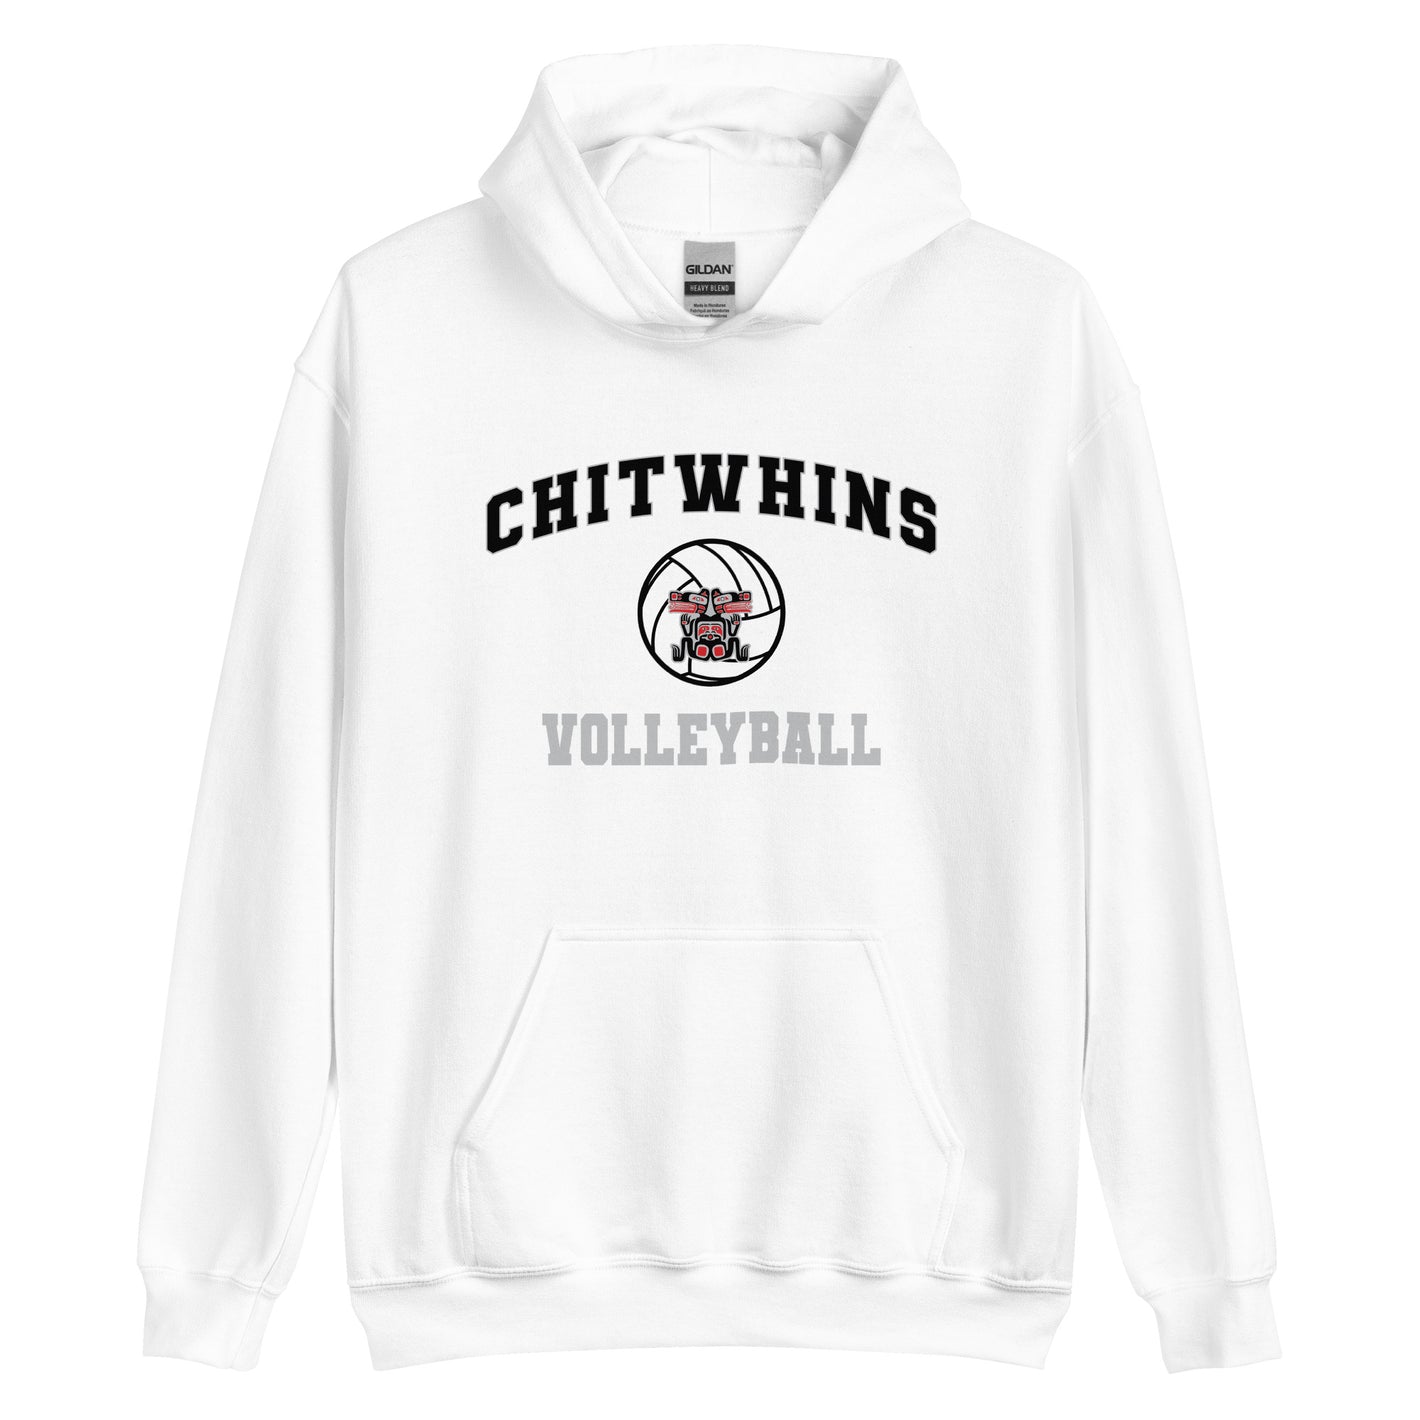 Chitwhins Volleyball Unisex Hoodie